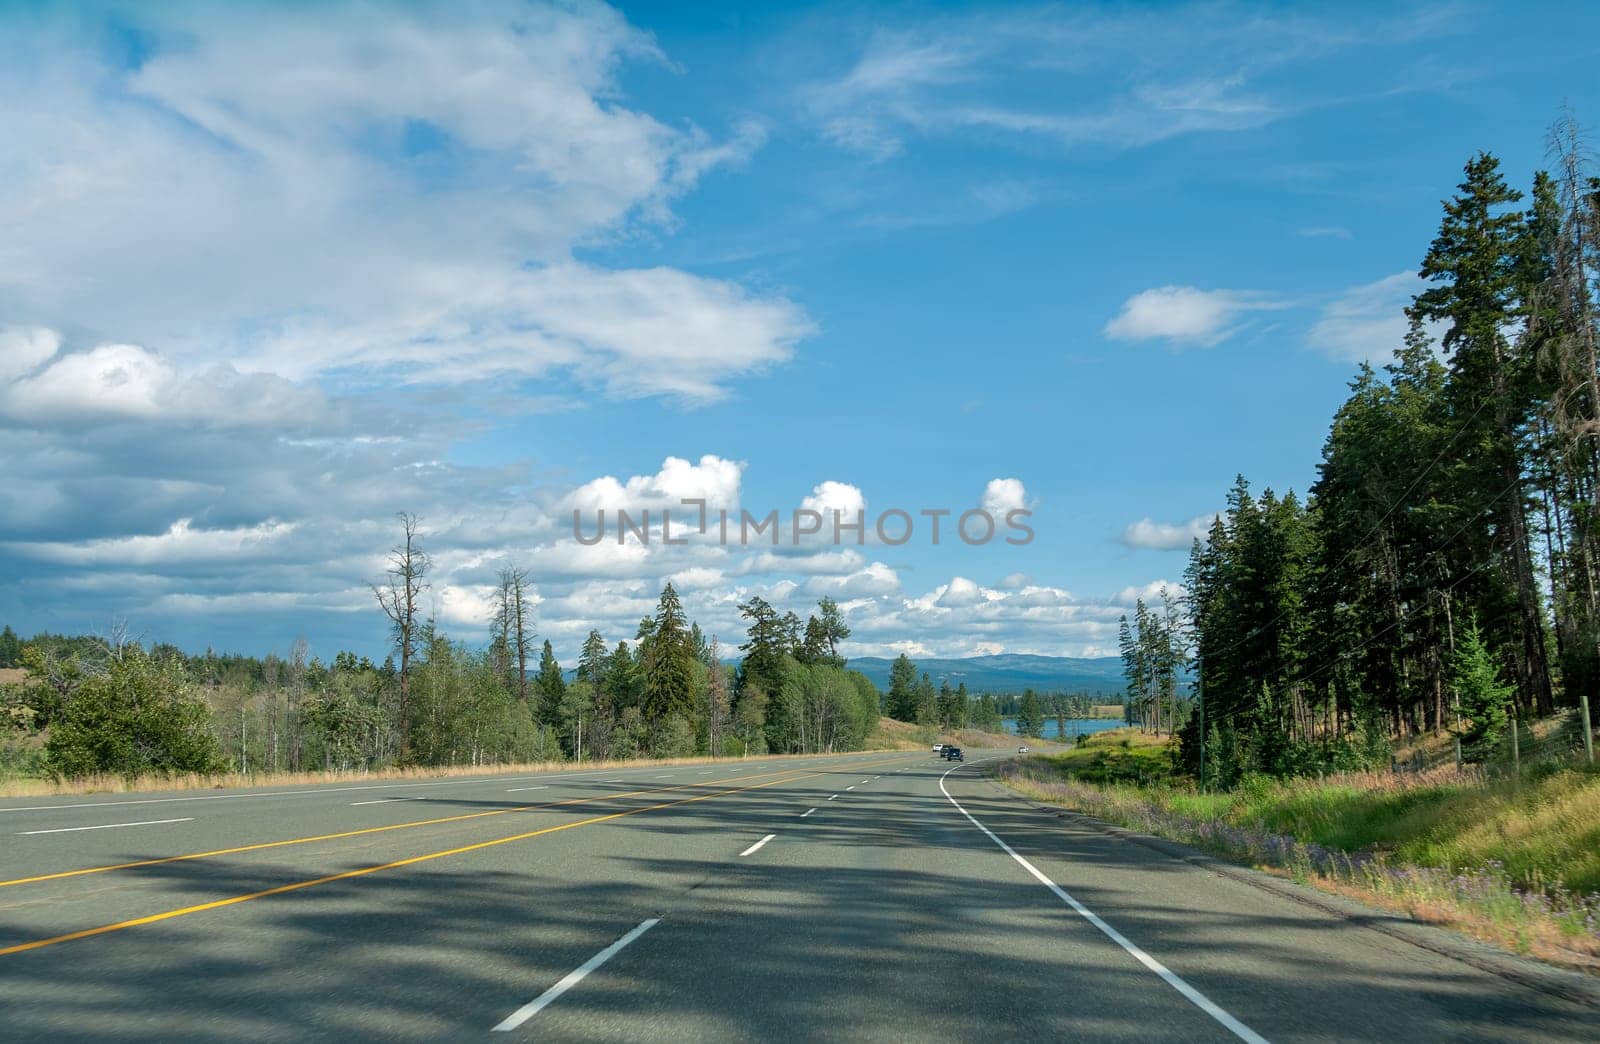 Turn of highway one in mountains of British Columbia.